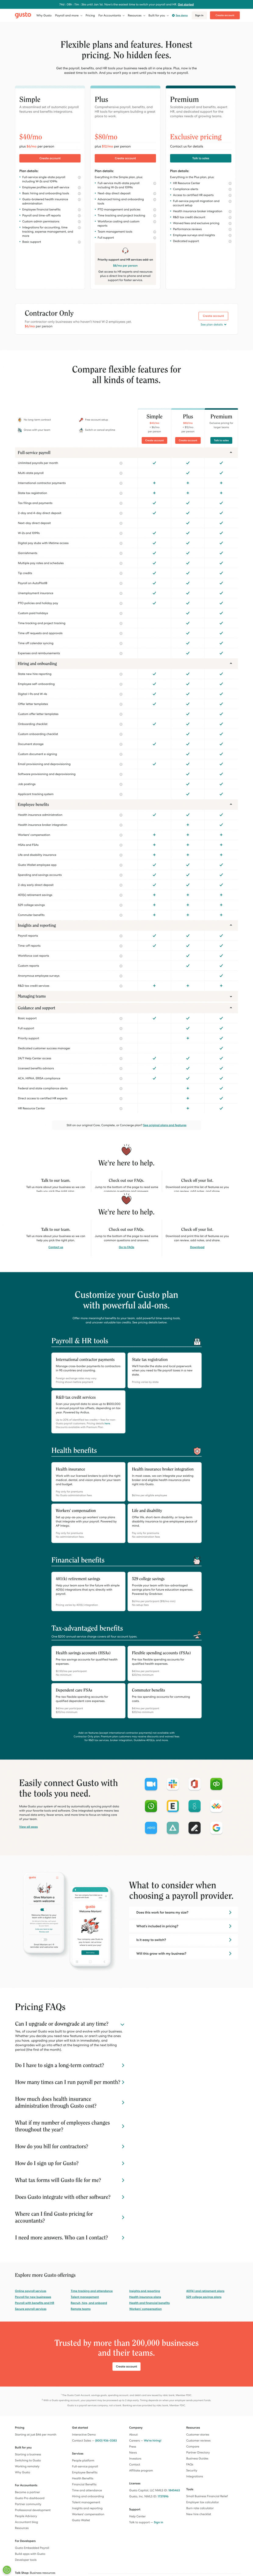 gusto-pricing-page